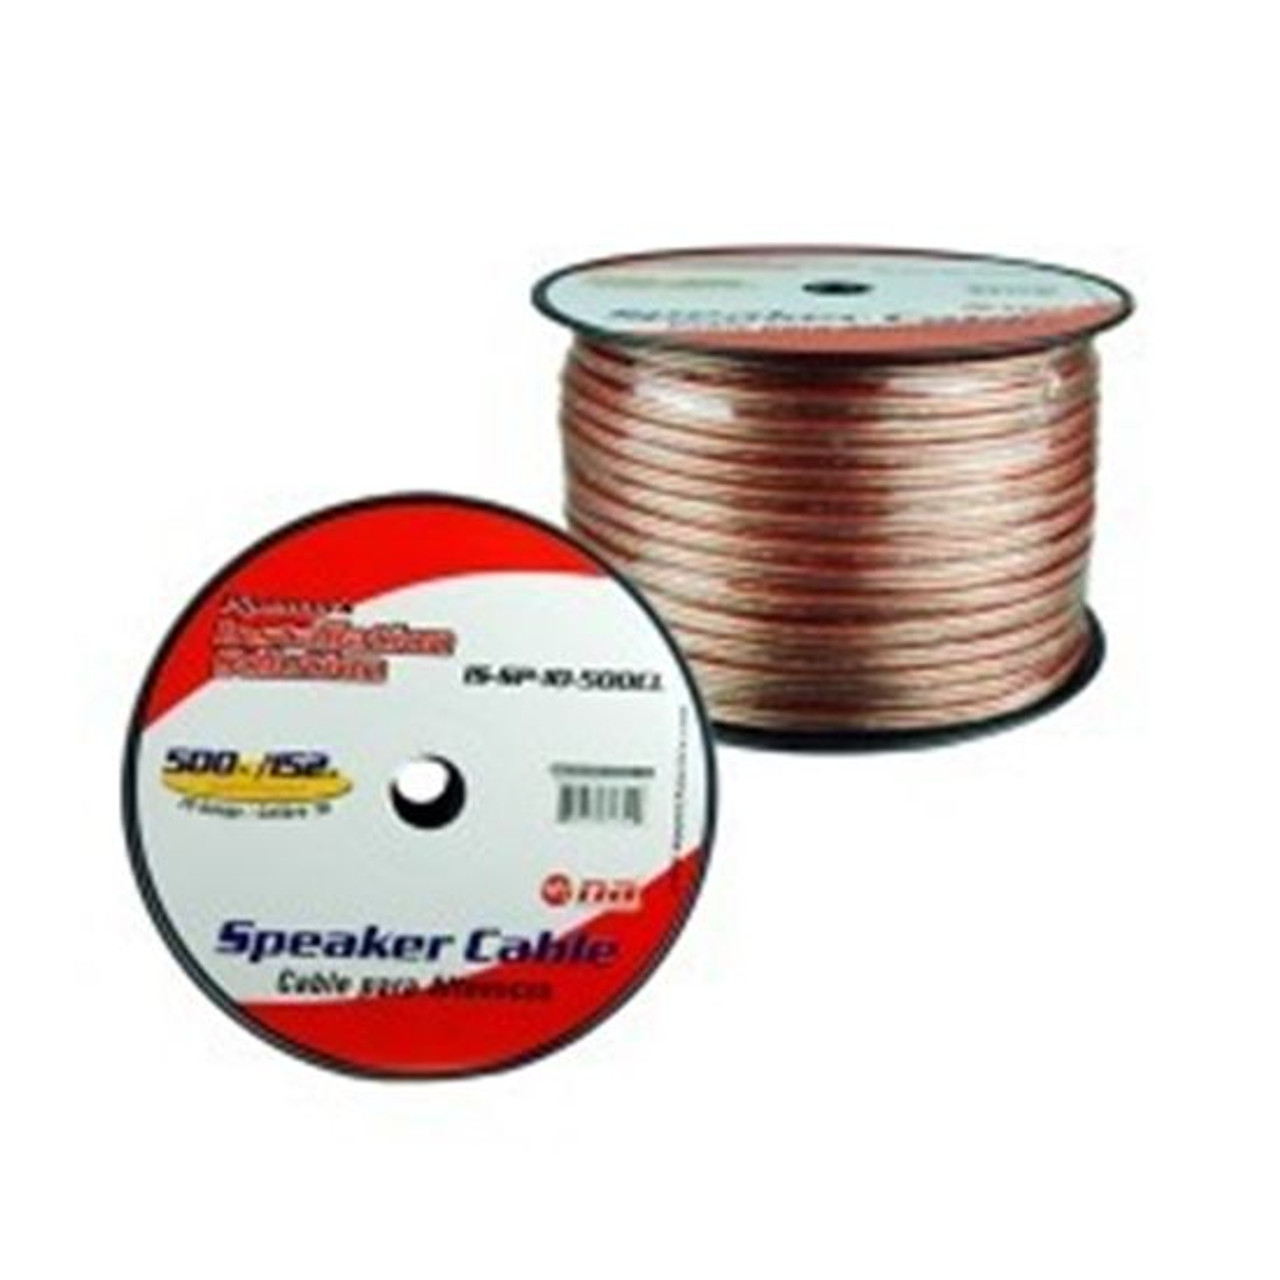 Eagle IS-SP-10-500CL 500 FT Speaker Cable 10 AWG 2 Wire Conductor Audio Clear Stranded CCA Copper Polarized